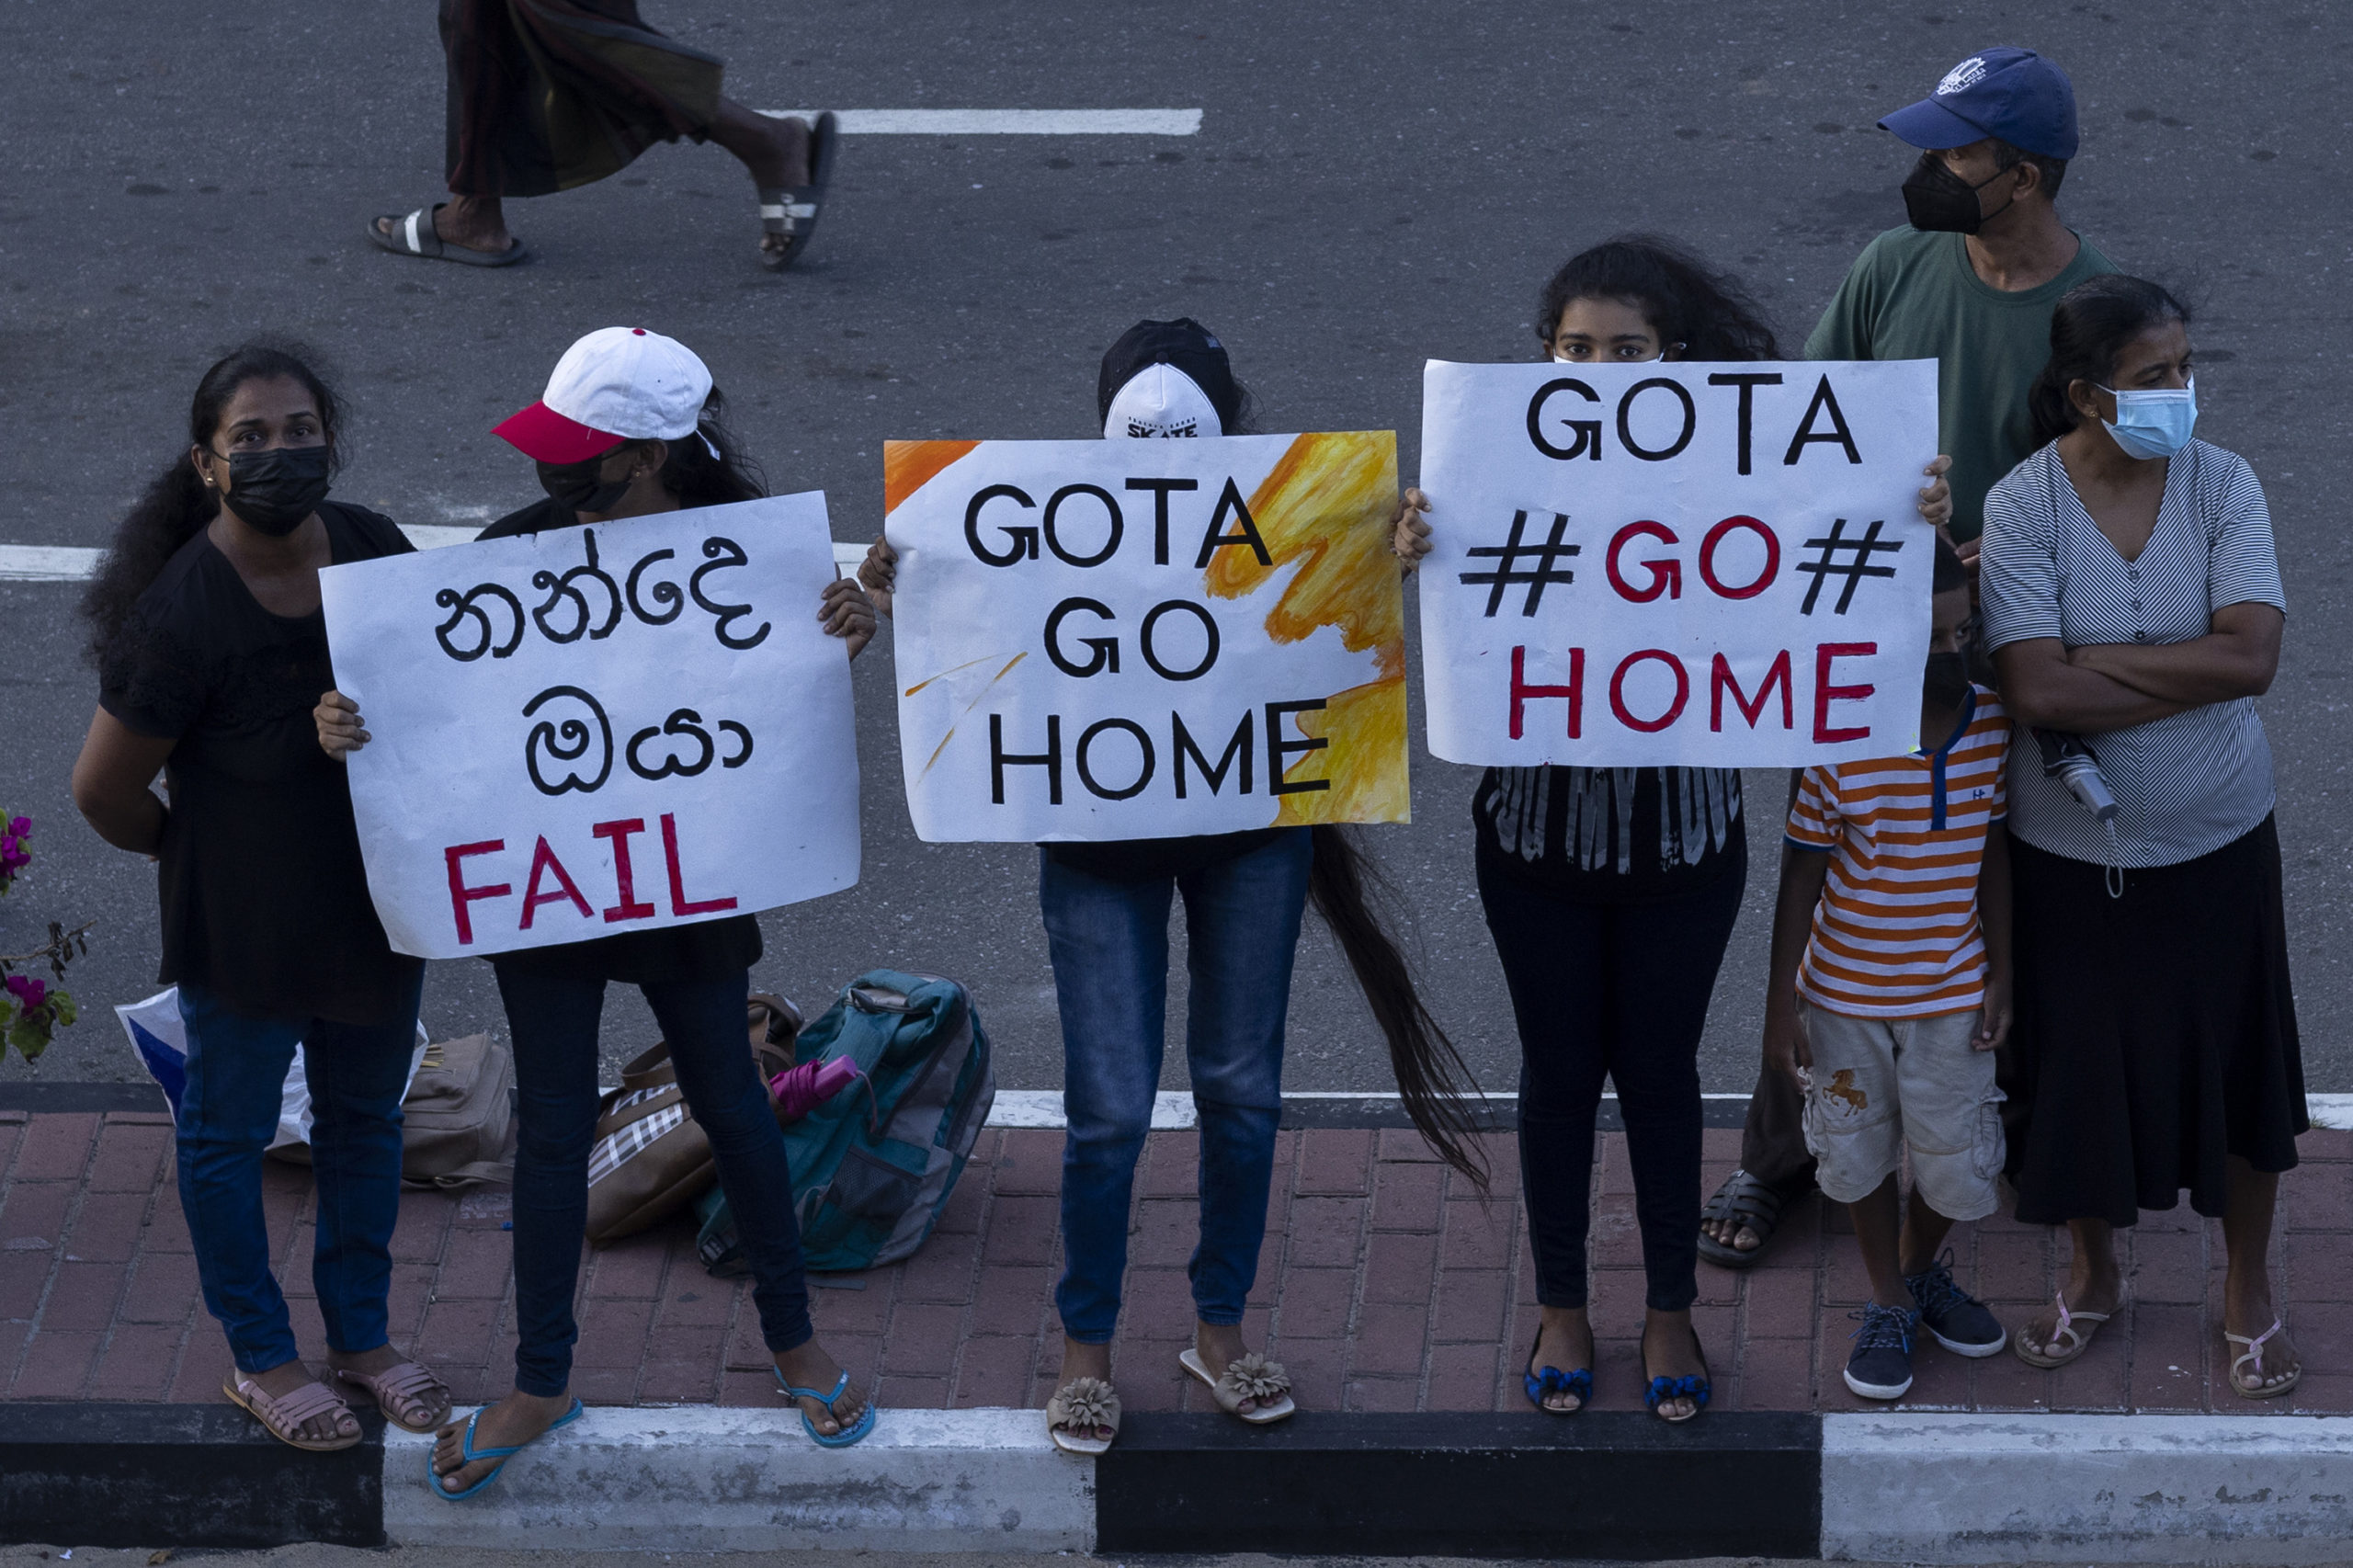 GALLE, SRI LANKA - JULY 09: Anti-government protesters hold placards during protests calling for the resignation of Sri Lanka's President Gotabaya Rajapaksa and Prime Minister Ranil Wickremesinghe on July 09, 2022 in Galle, Sri Lanka. Beleaguered Sri Lankan President Gotabaya Rajapaksa has said he would resign after he fled his official residence in Colombo following thousands of anti-government protesters storming the compound. (Photo by Buddhika Weerasinghe/Getty Images)